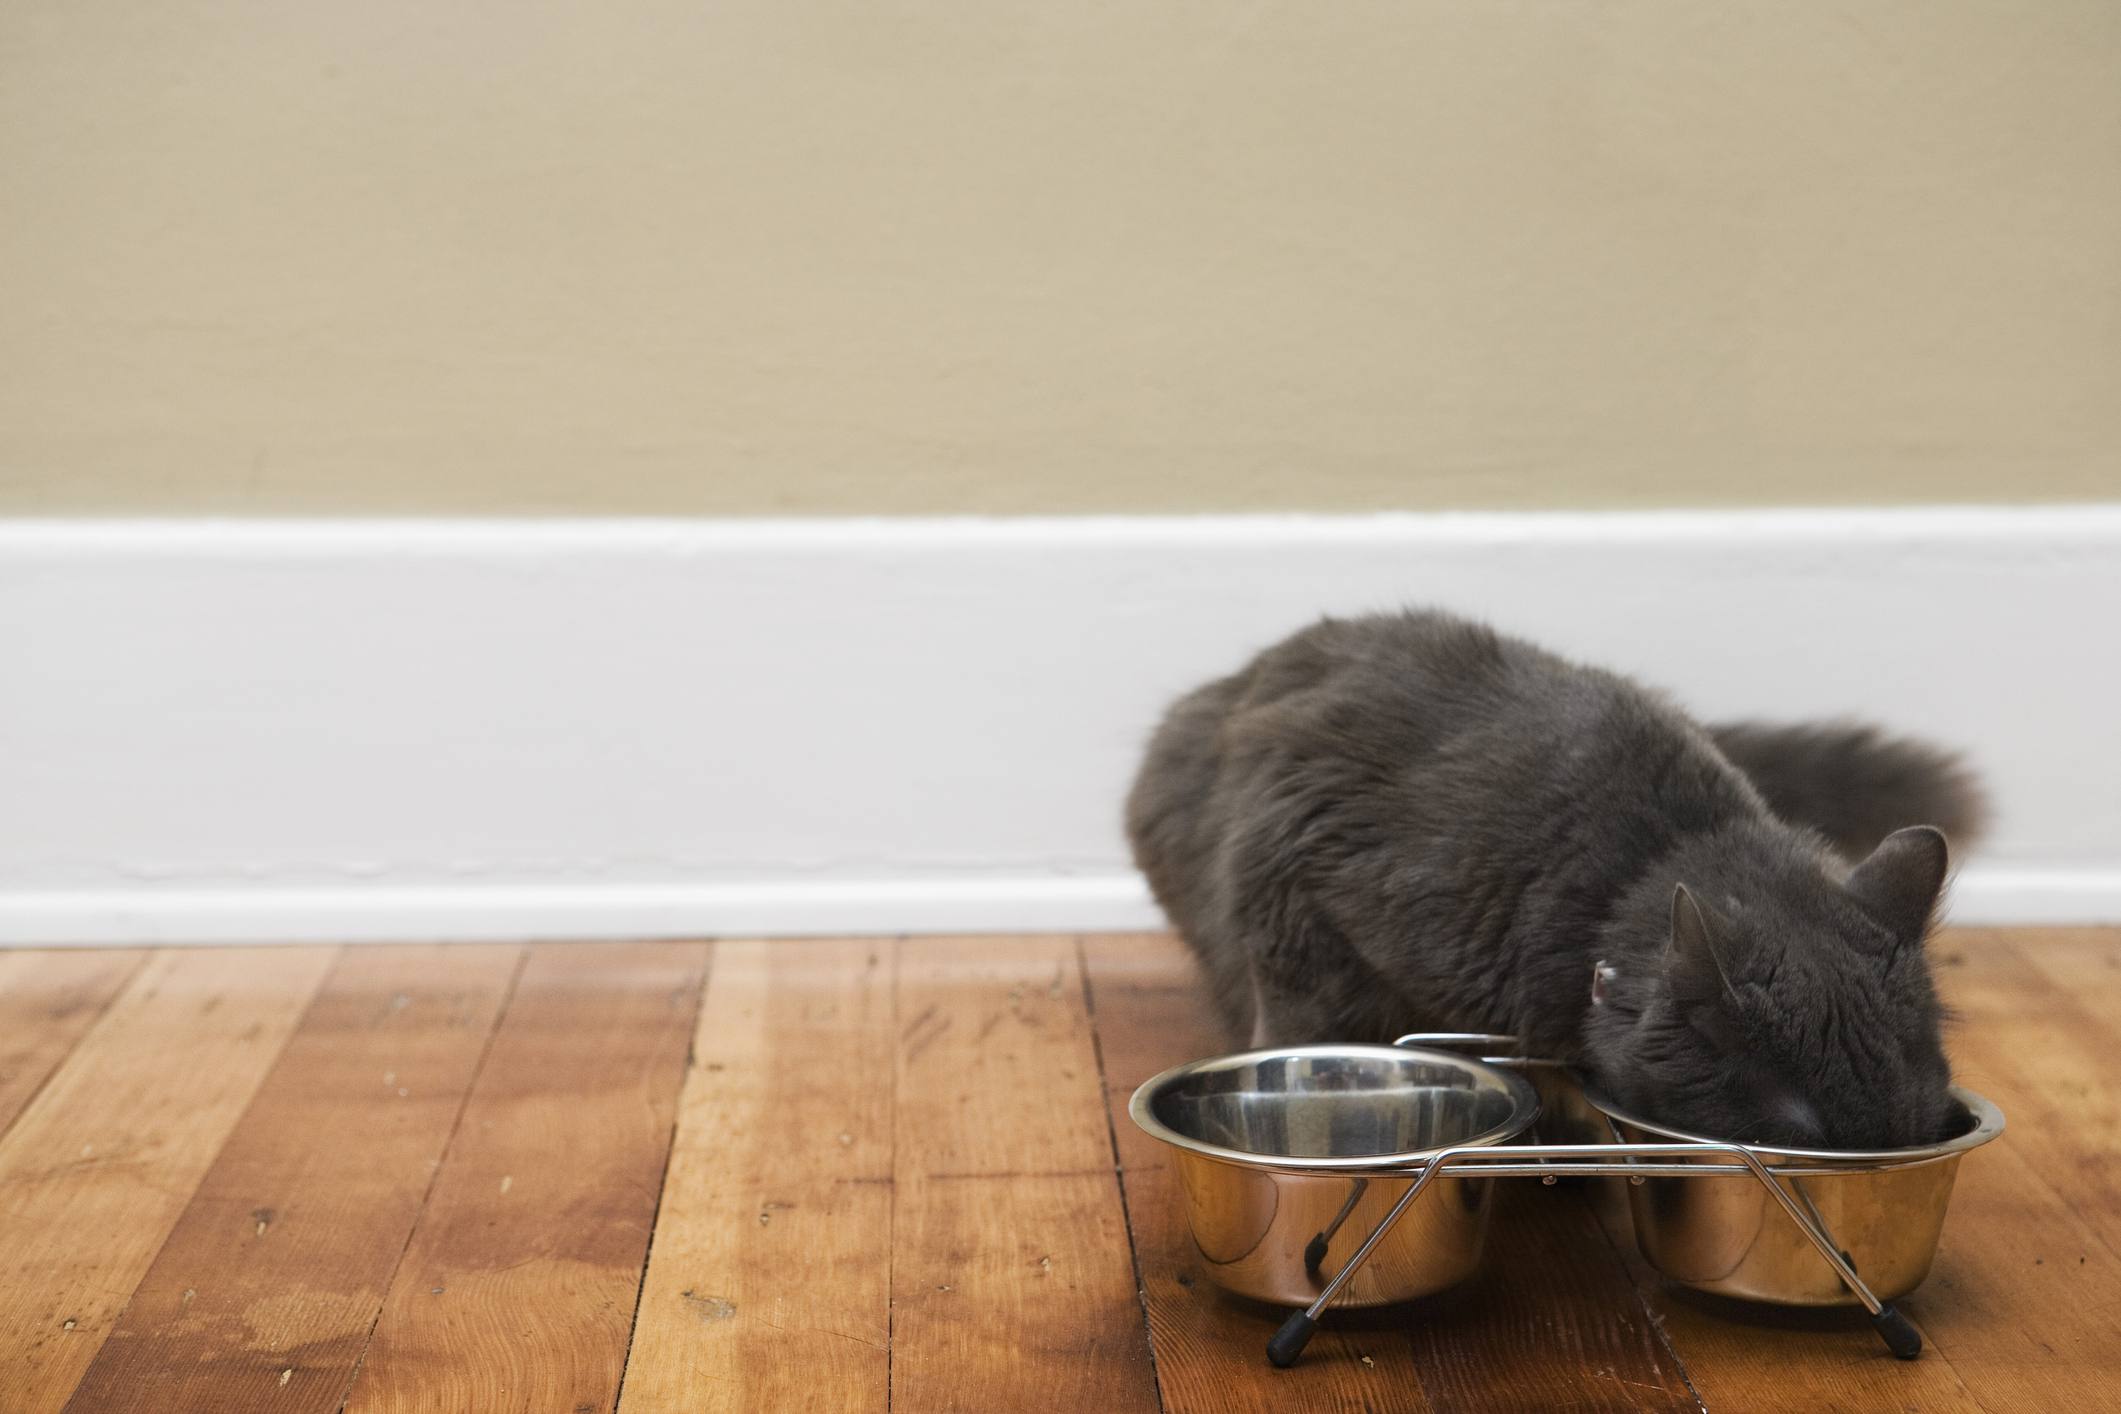 Cat eating food out of a stainless steel food dish.